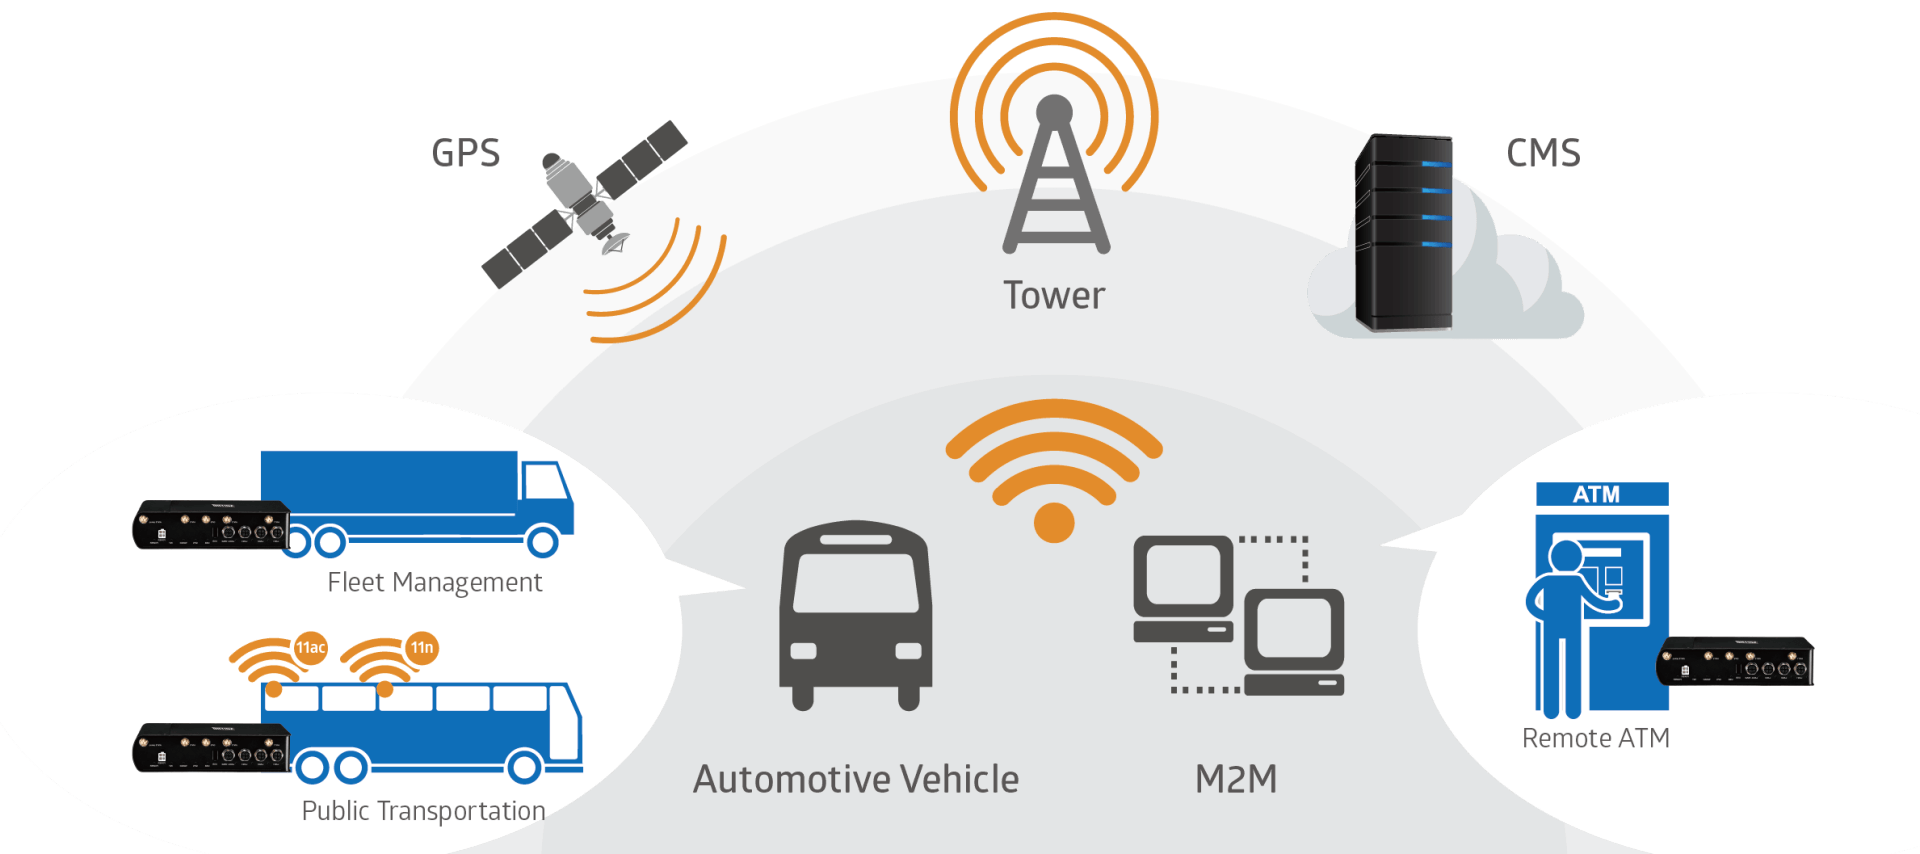 M600-M12 5G｜Industrial/In-Vehicle 5G Router｜BECbyBILLION